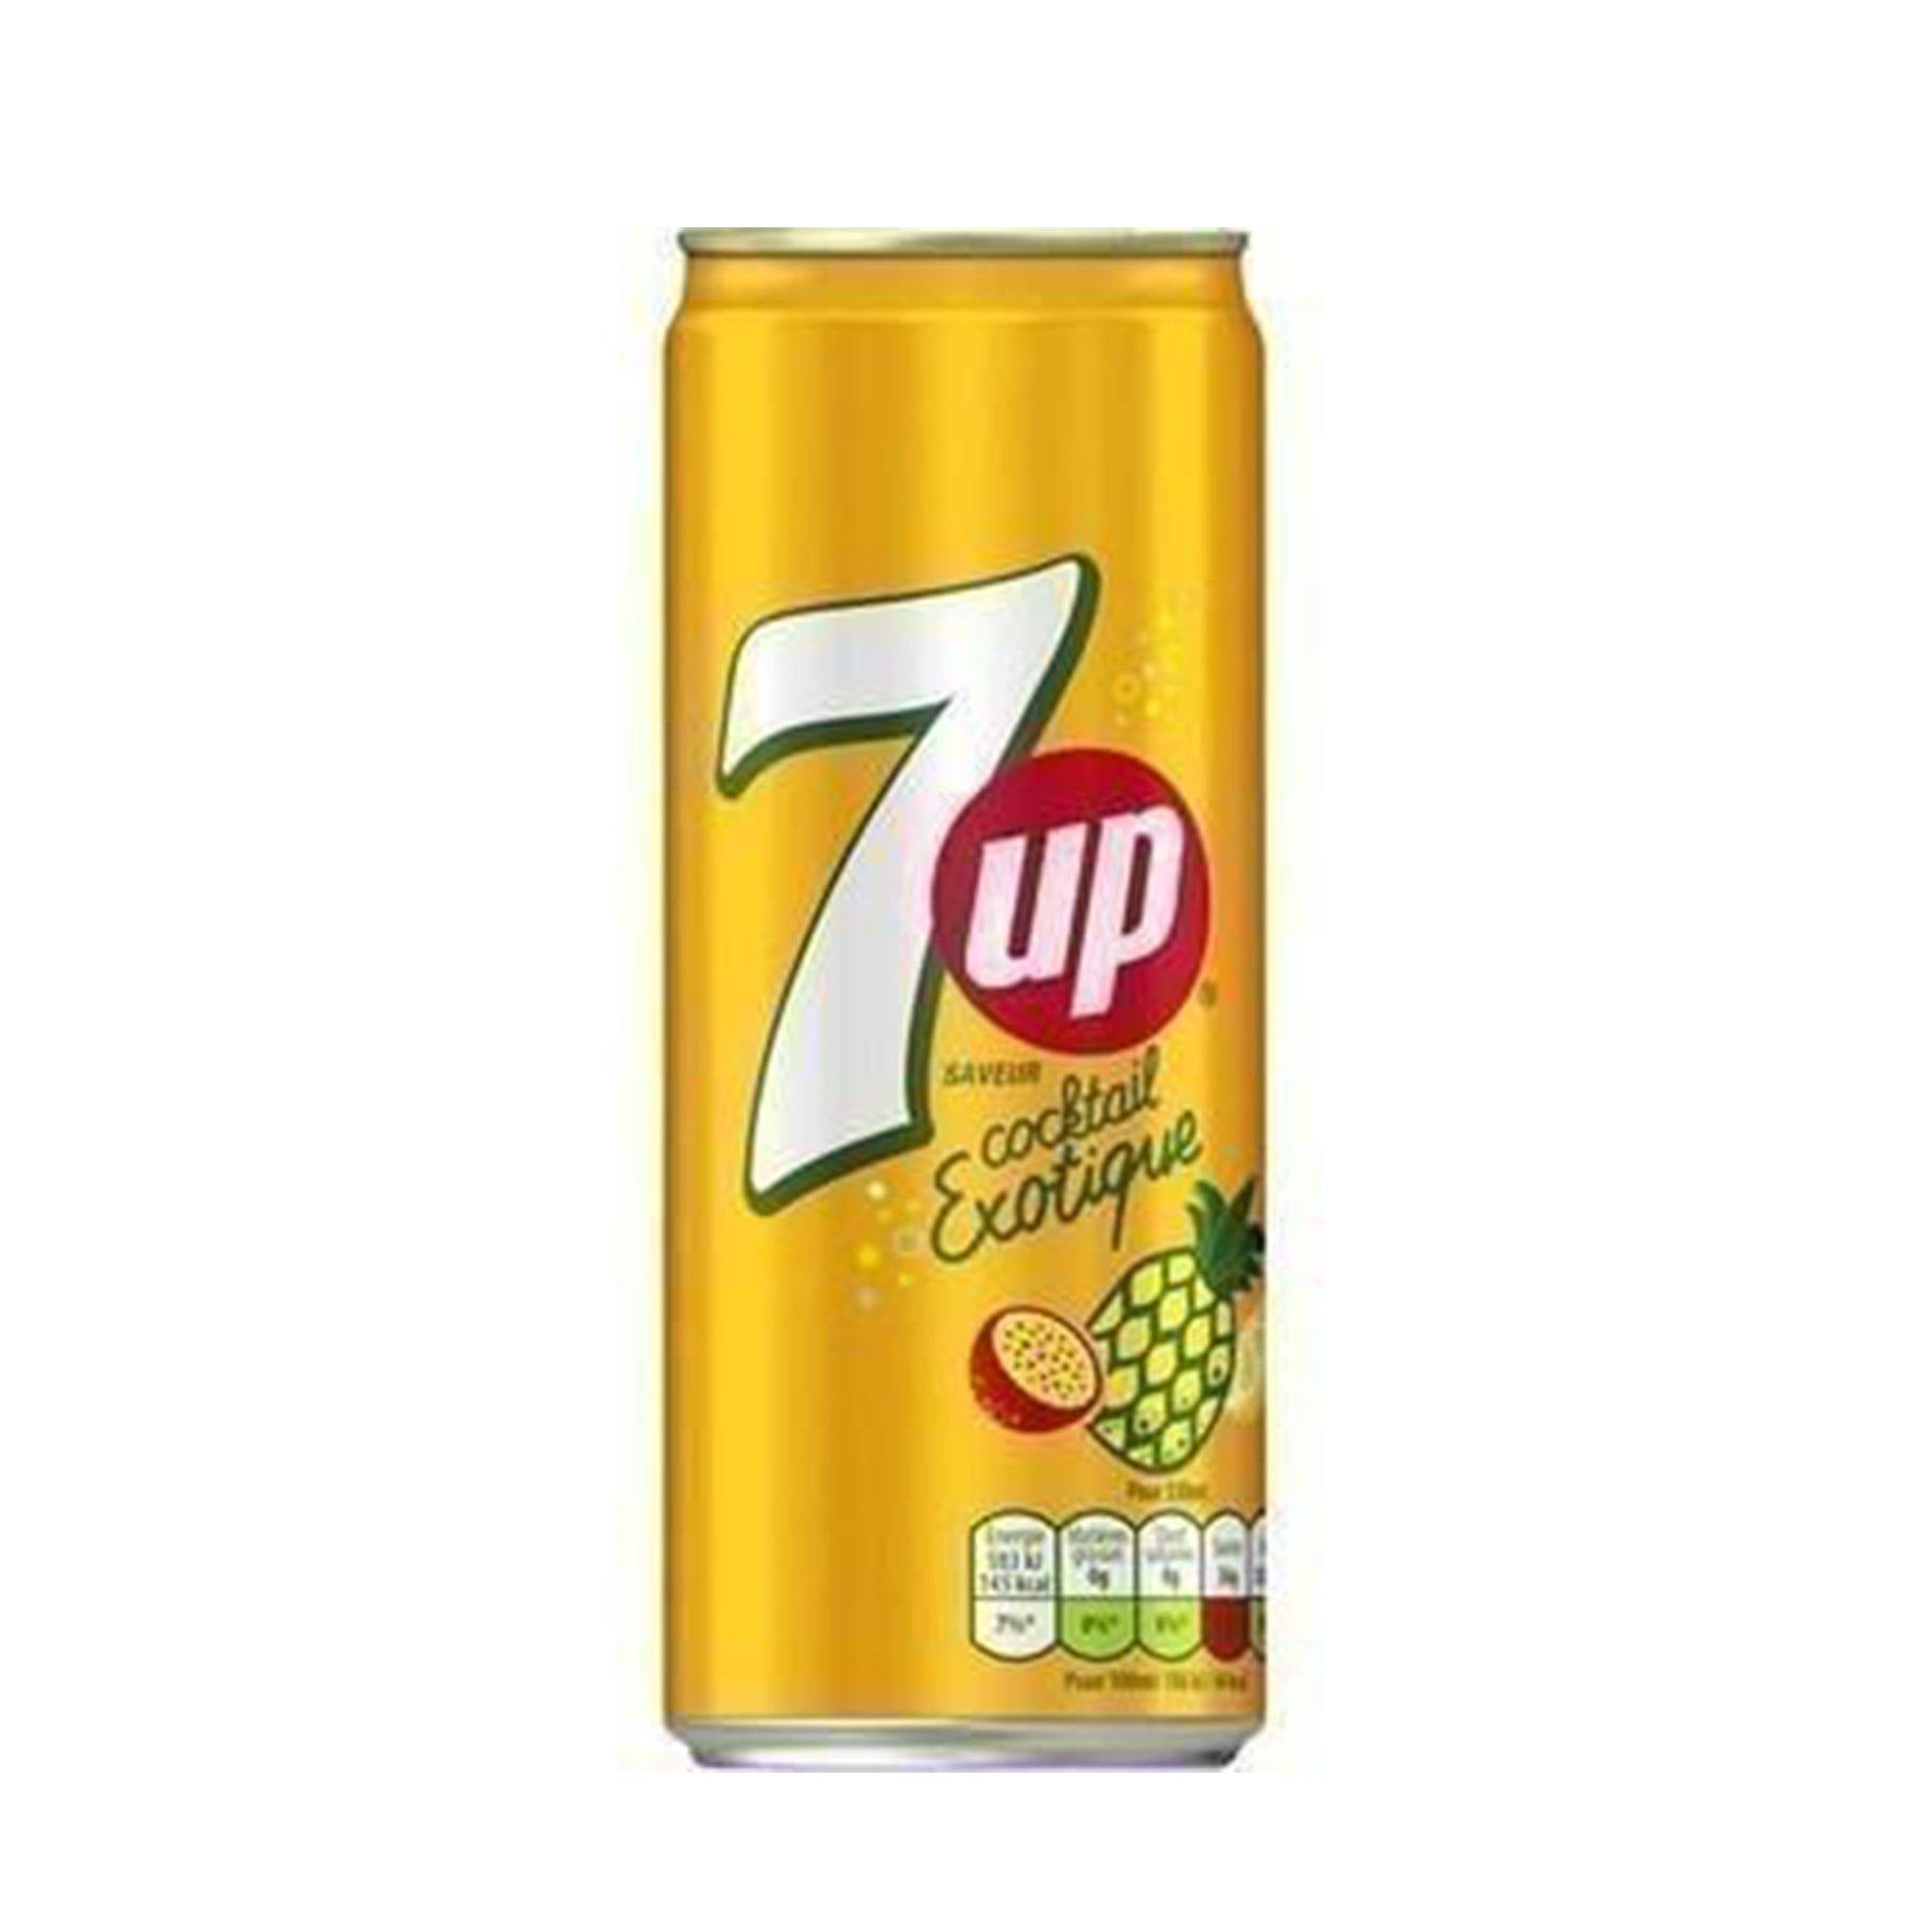 7UP Cocktail Exotique - France - Sweet Exotics